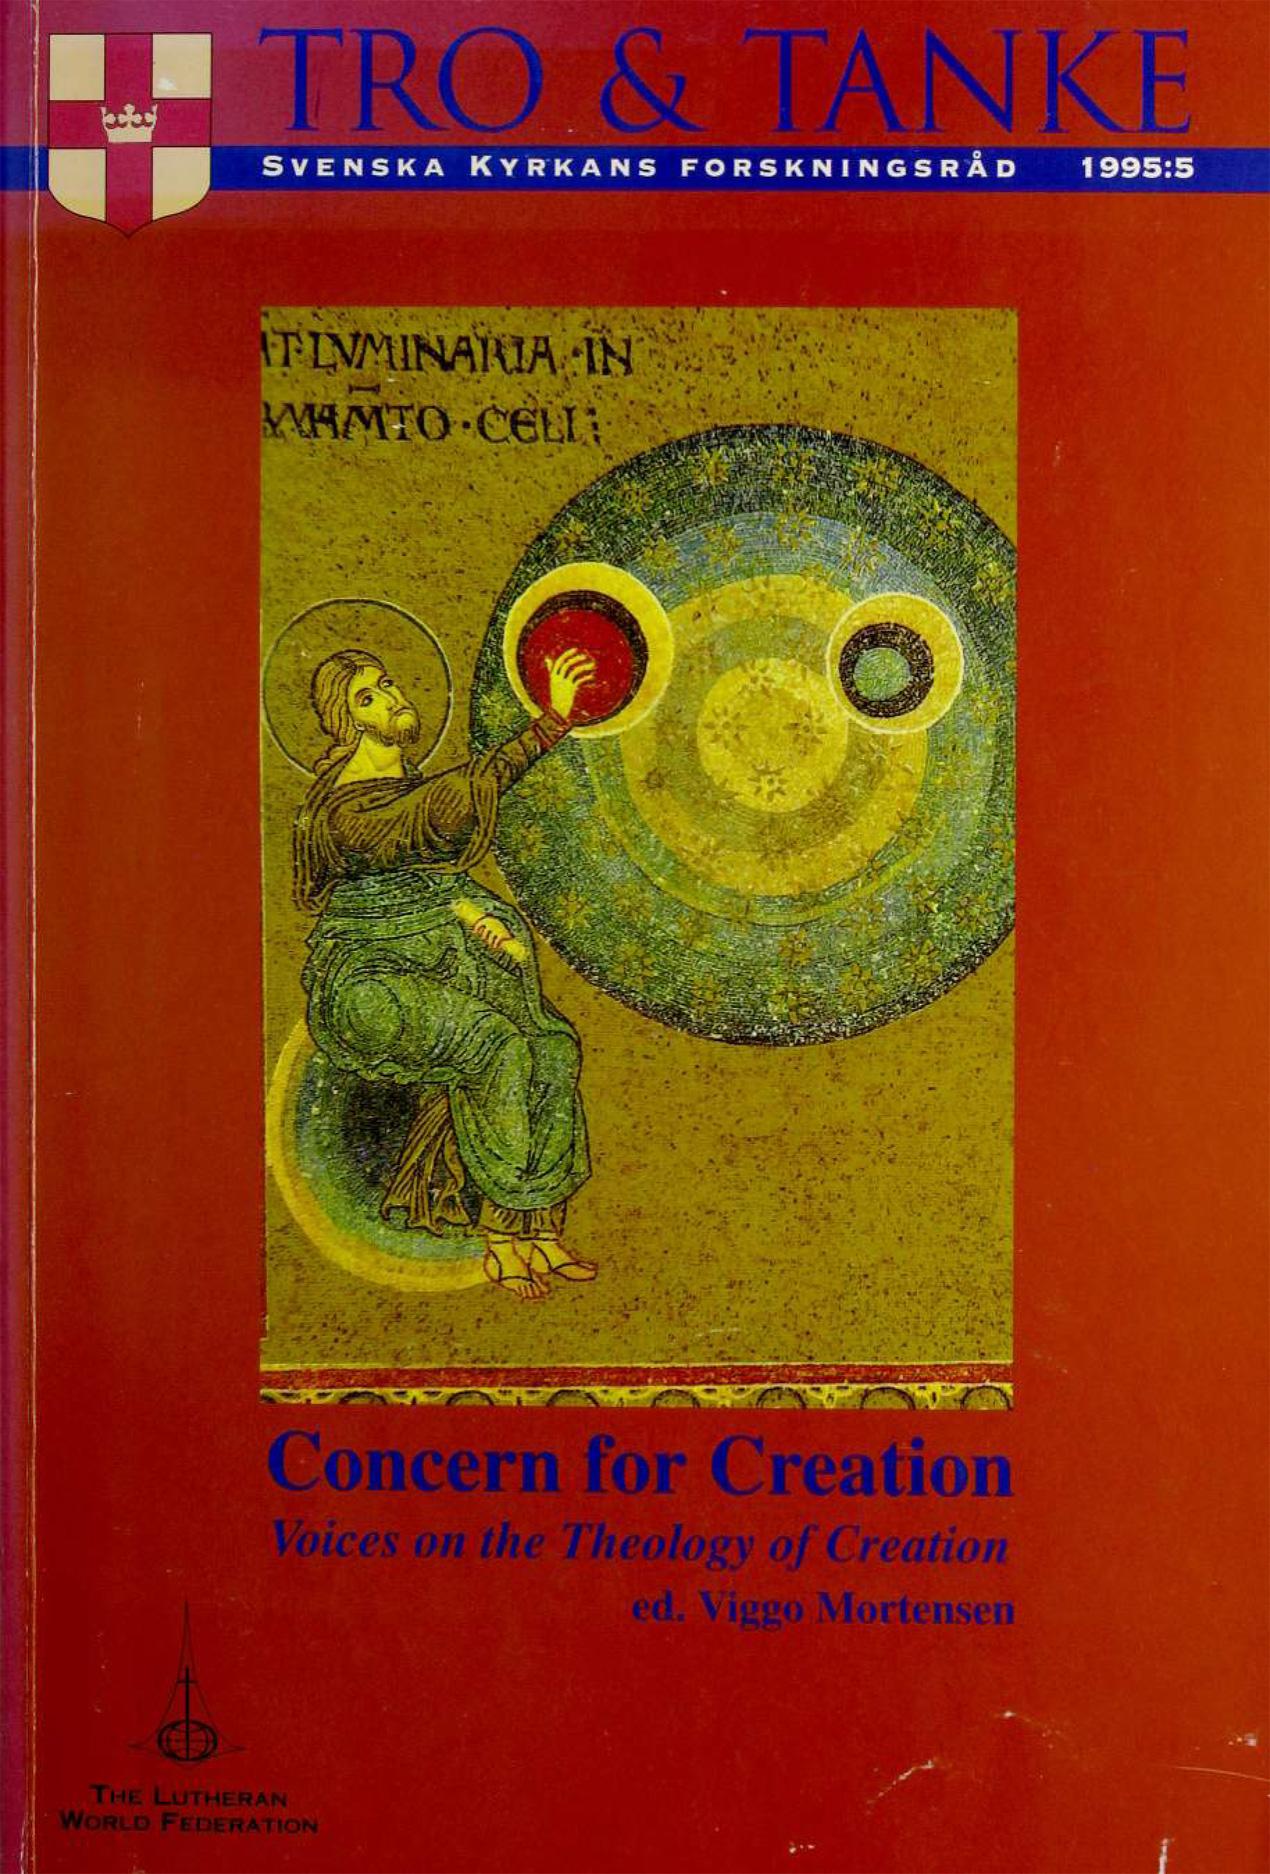 Concern for Creation